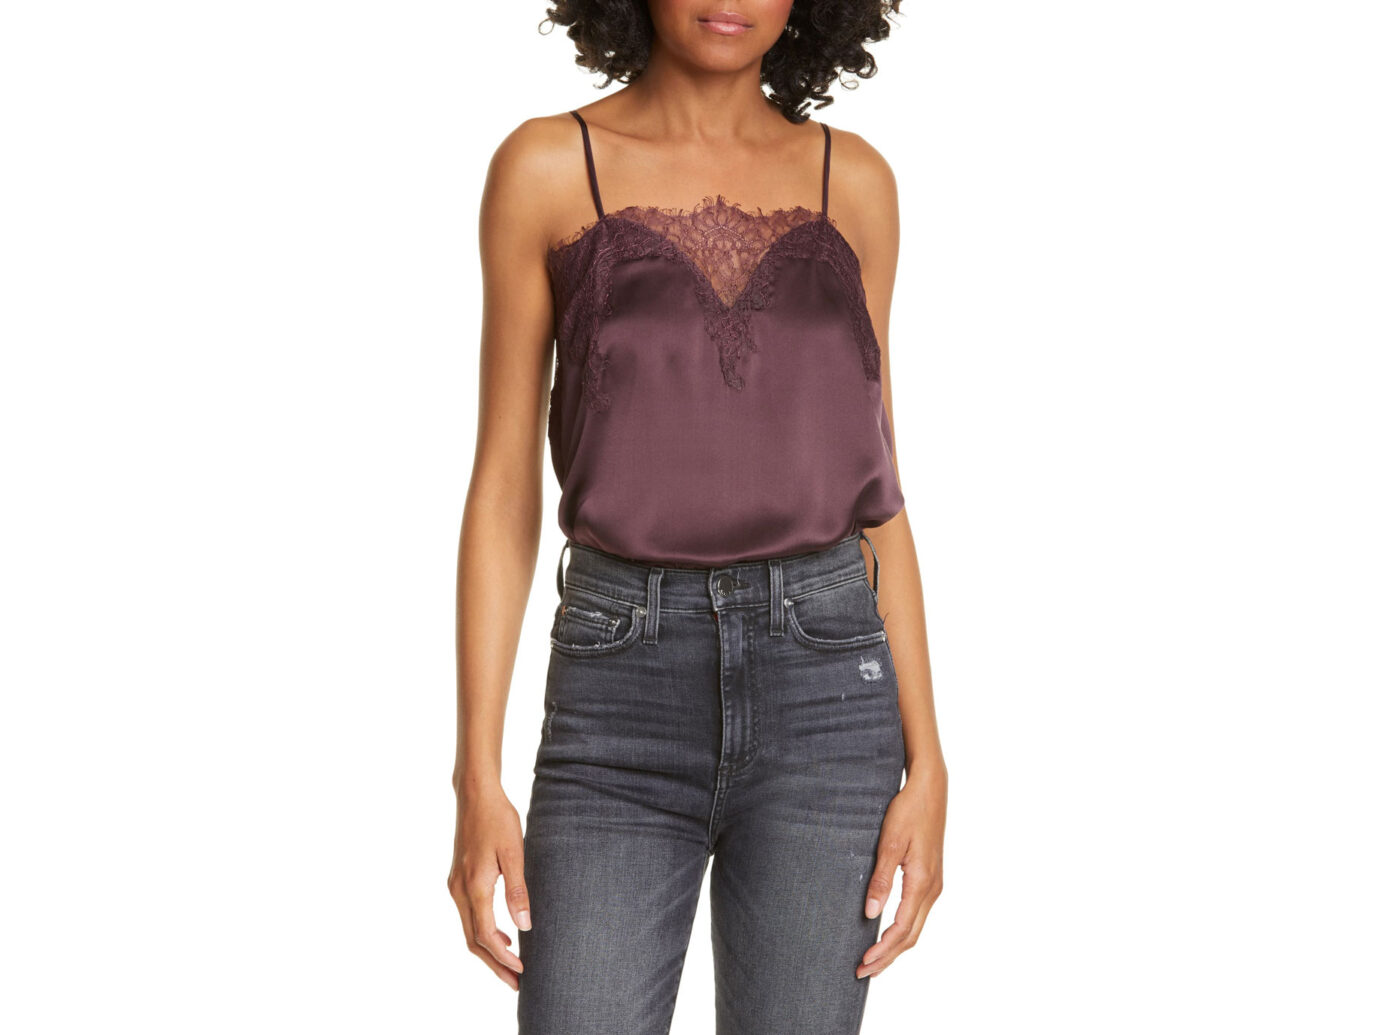 Cami NYC The Sweetheart Silk Charmeuse Camisole